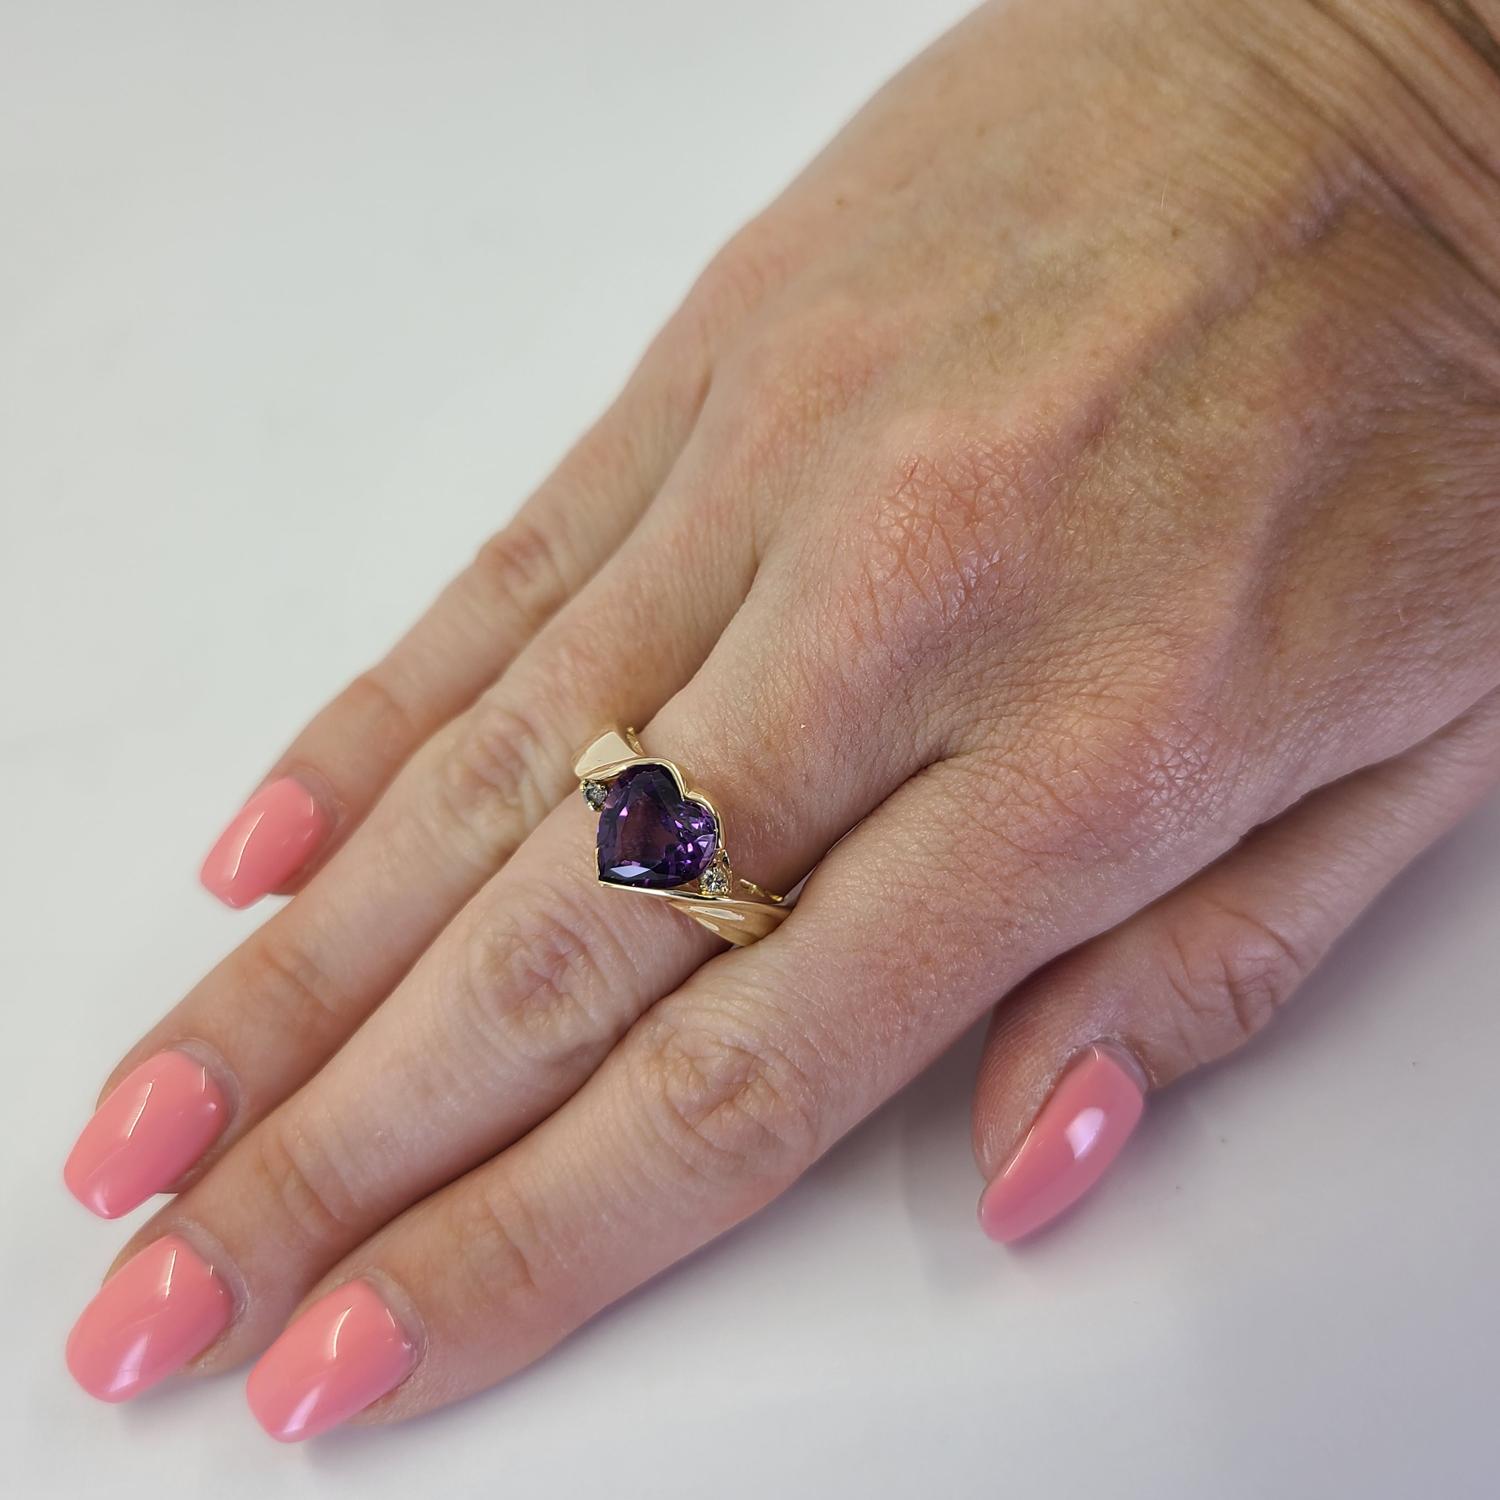 14 Karat Yellow Gold Heart Ring Featuring An Amethyst Weighing Approximately 1.00 Carat Accented by 2 Round Brilliant Cut Diamonds of SI Clarity and H Color Totaling 0.04 Carats. Finger Size 7. Finished Weight is 6.4 Grams.